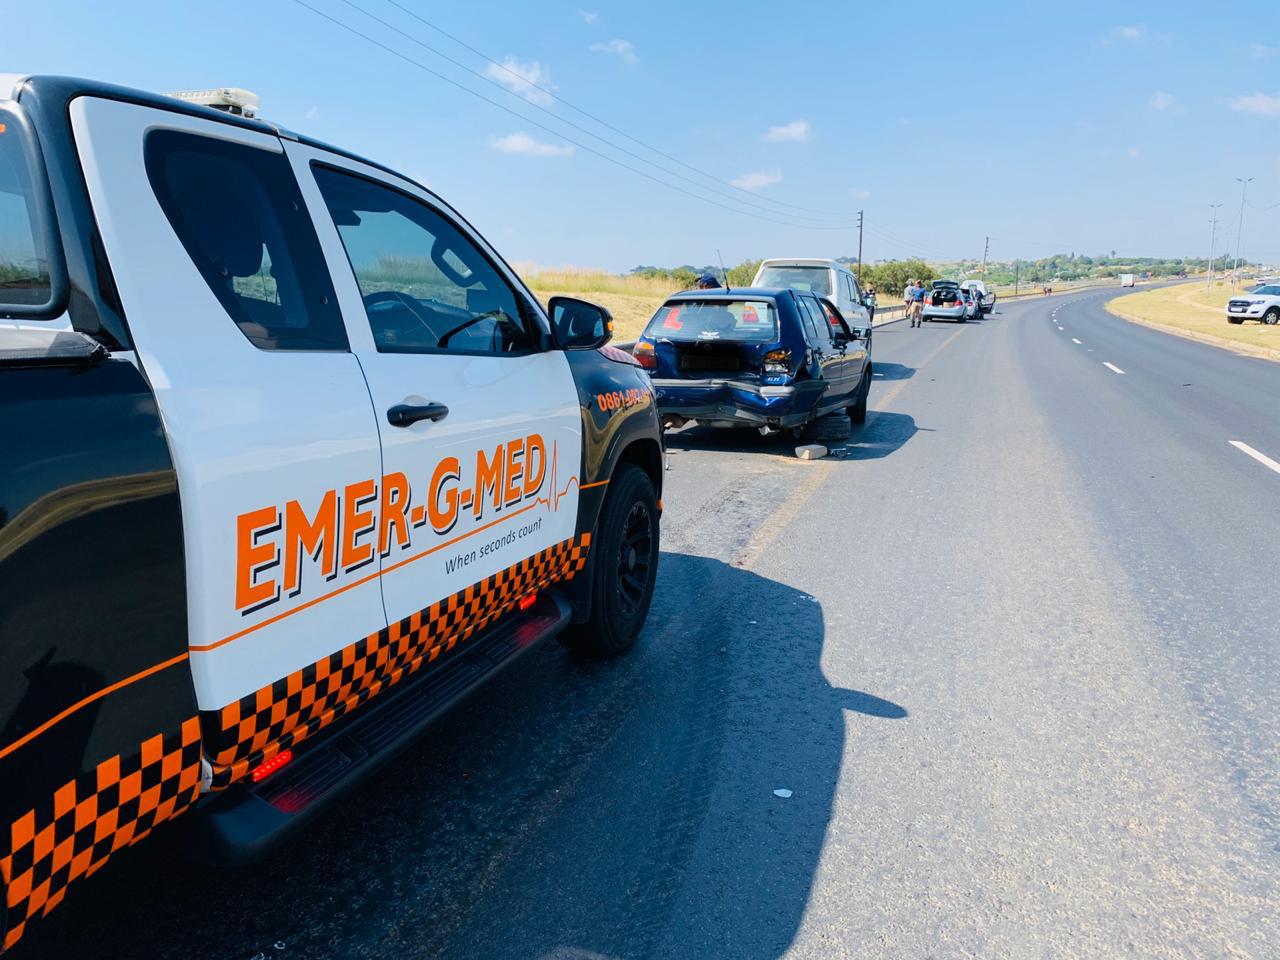 Vehicle collision on the N14